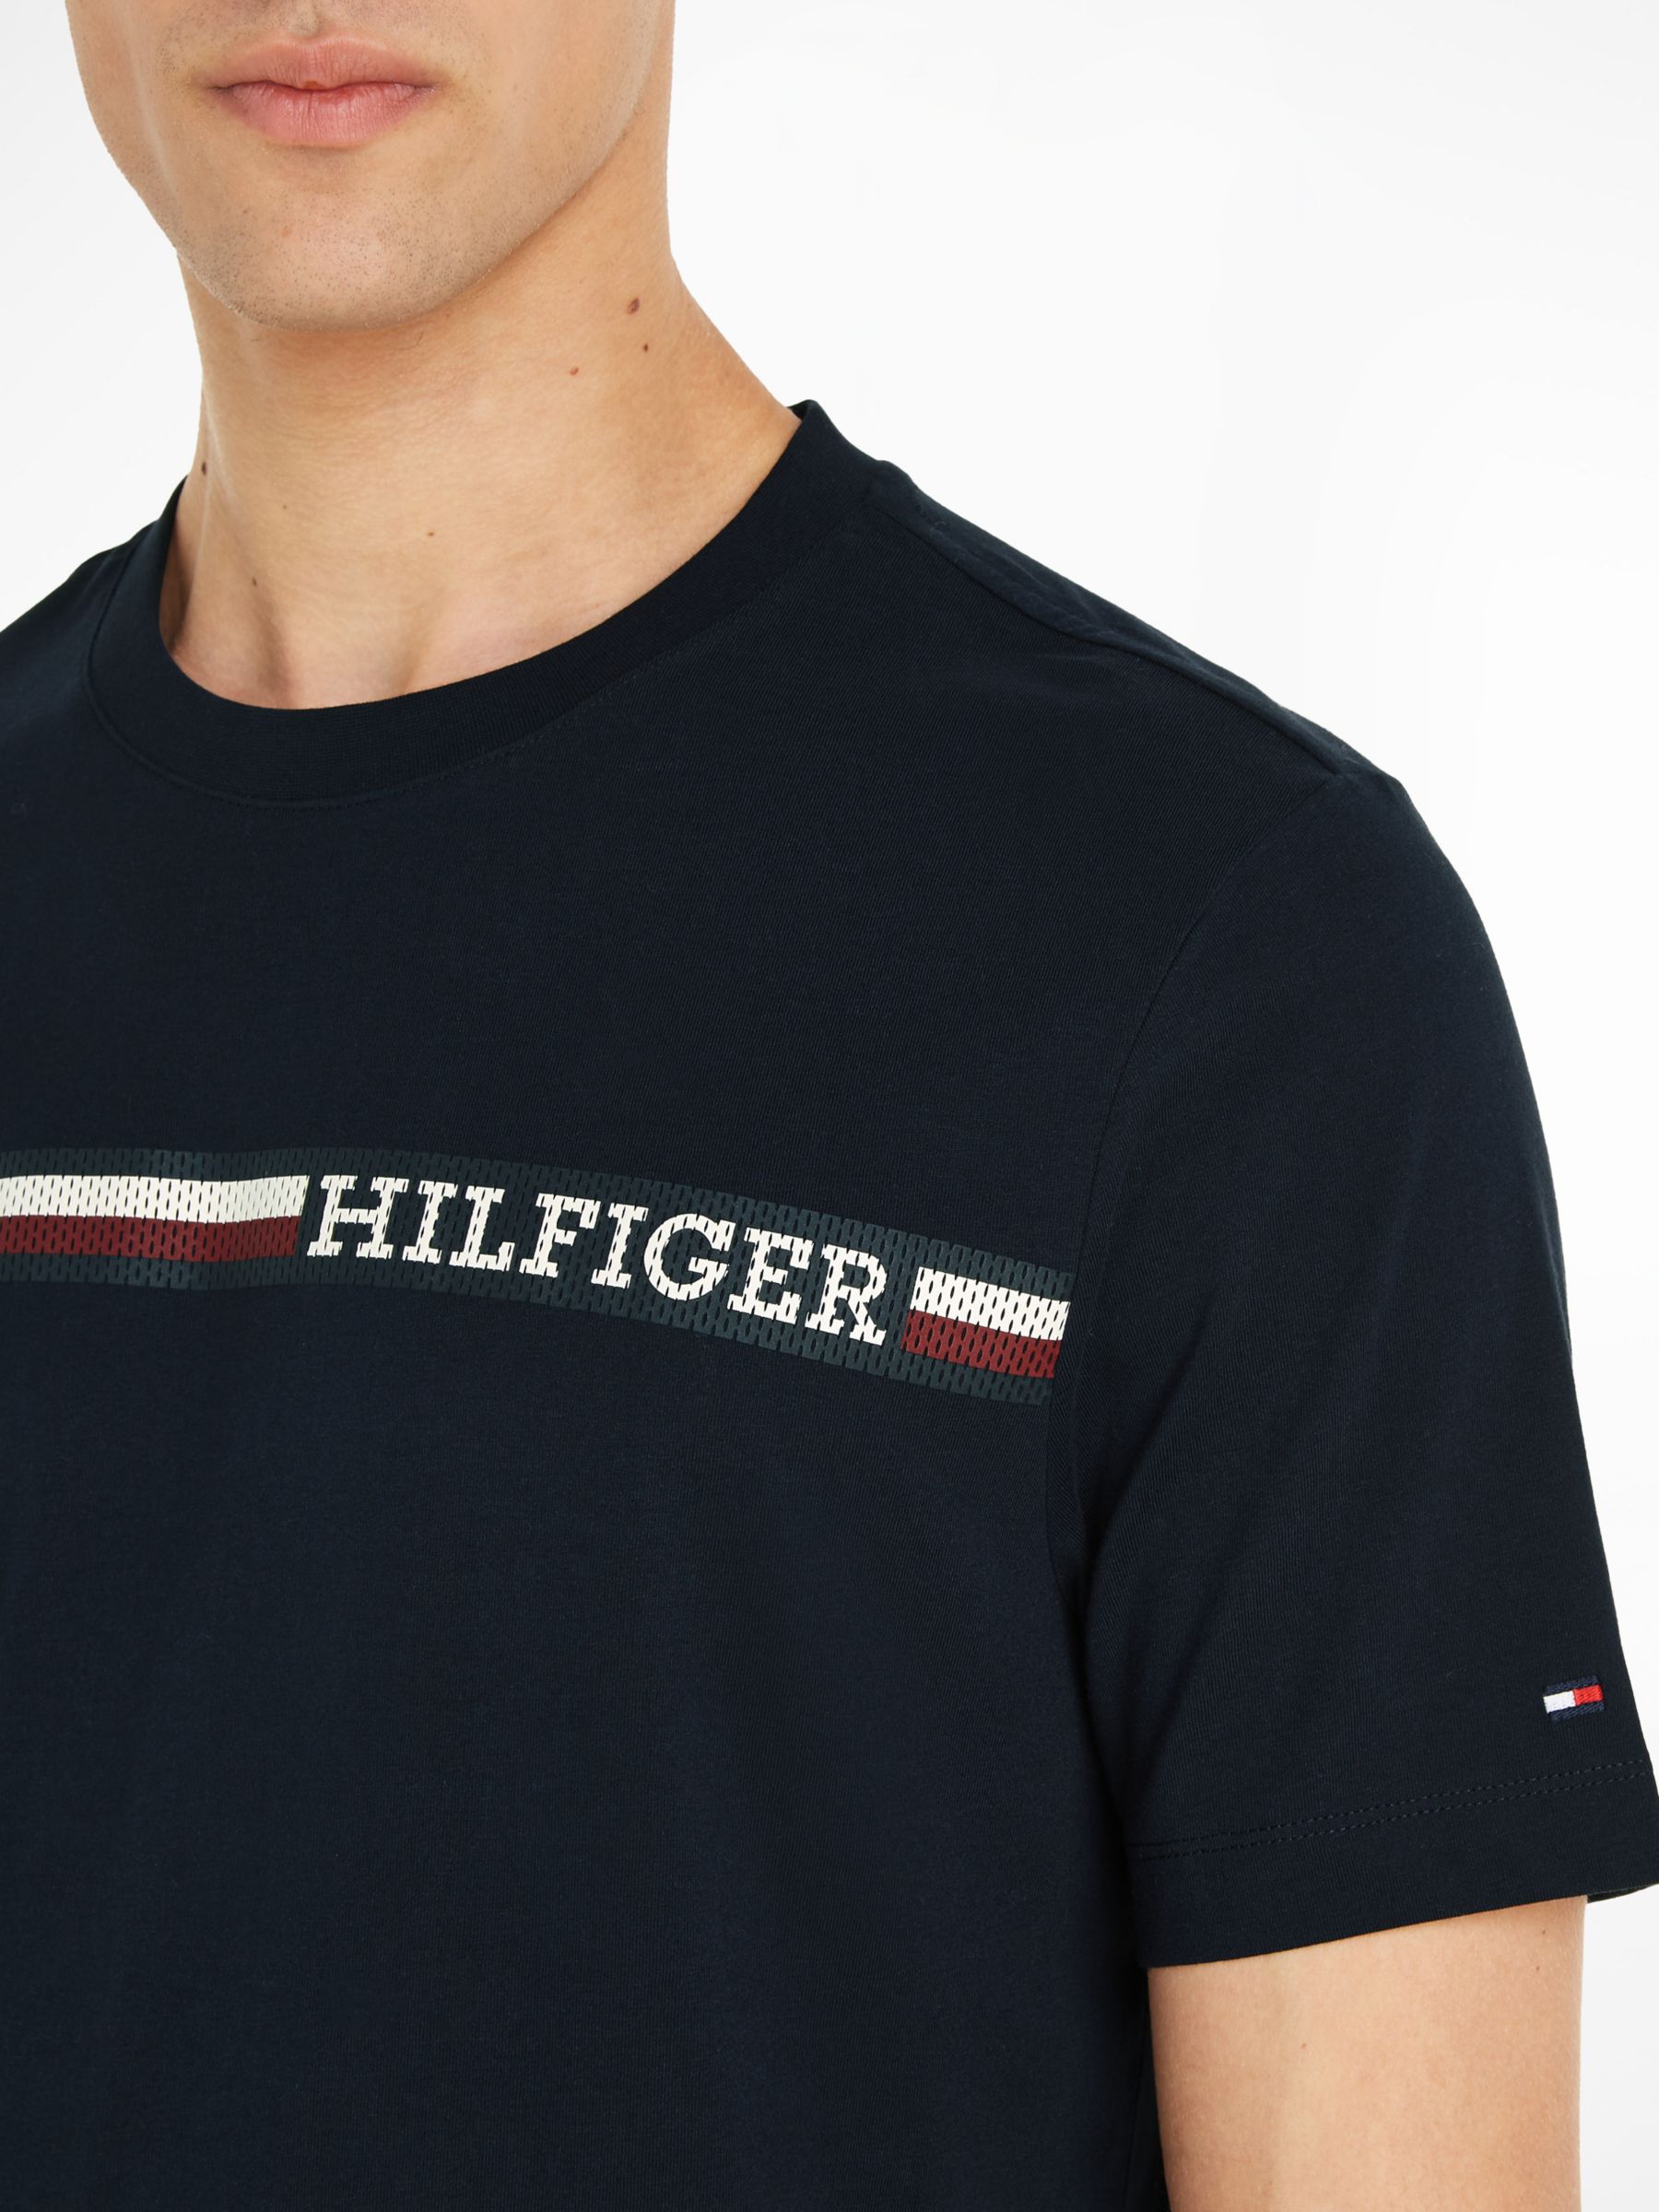 Buy Tommy Hilfiger Monotype Chest Strip T-Shirt Online at johnlewis.com